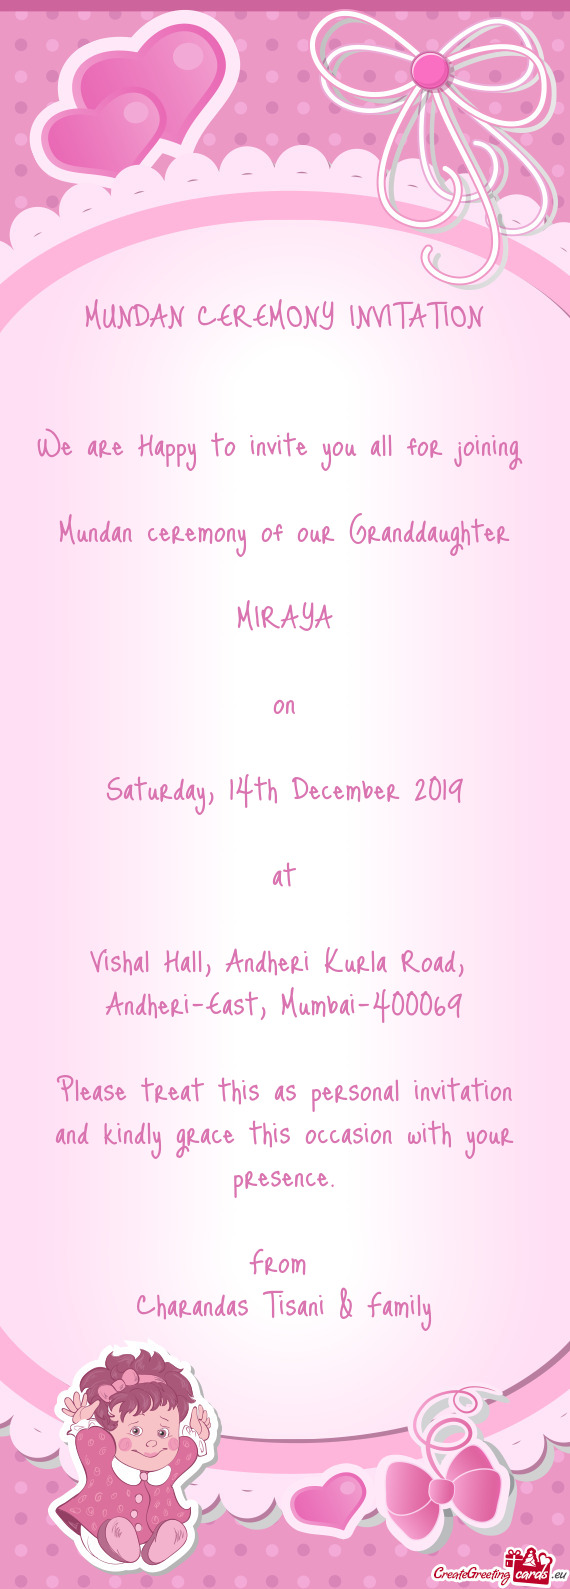 Mundan ceremony of our Granddaughter